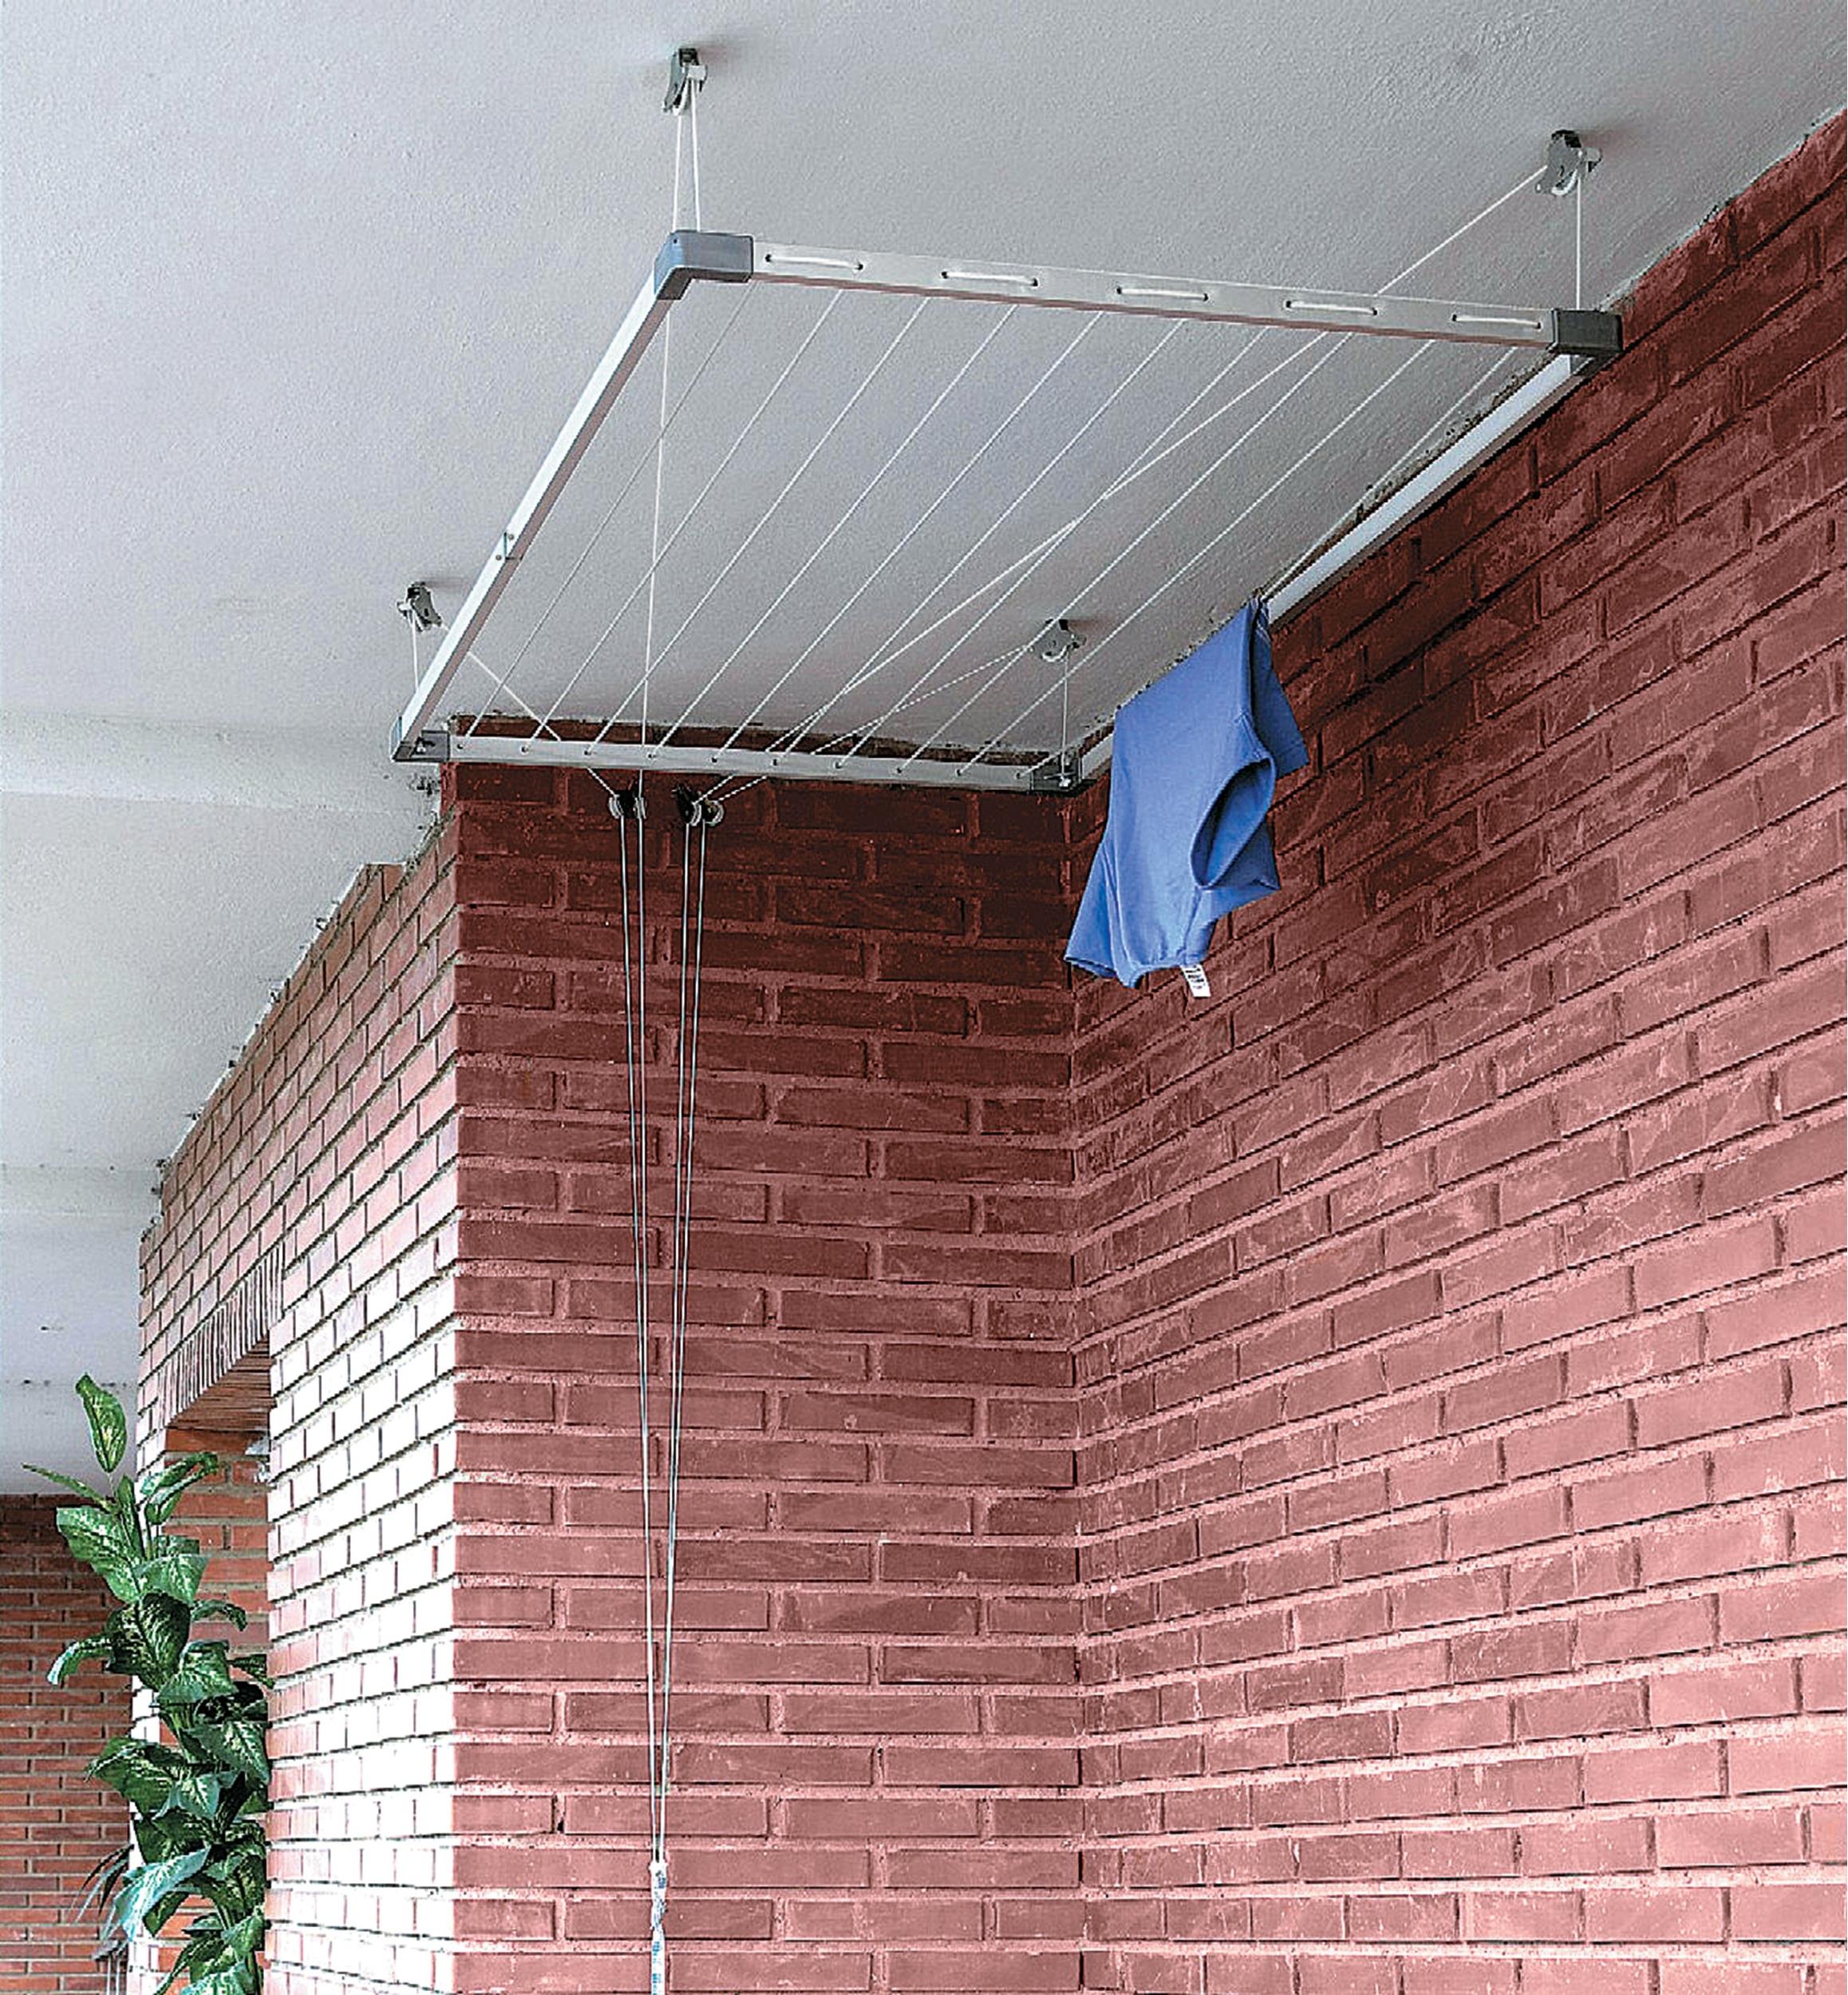 Ceiling mounted pulley type cloth drying hangers in Kidangara